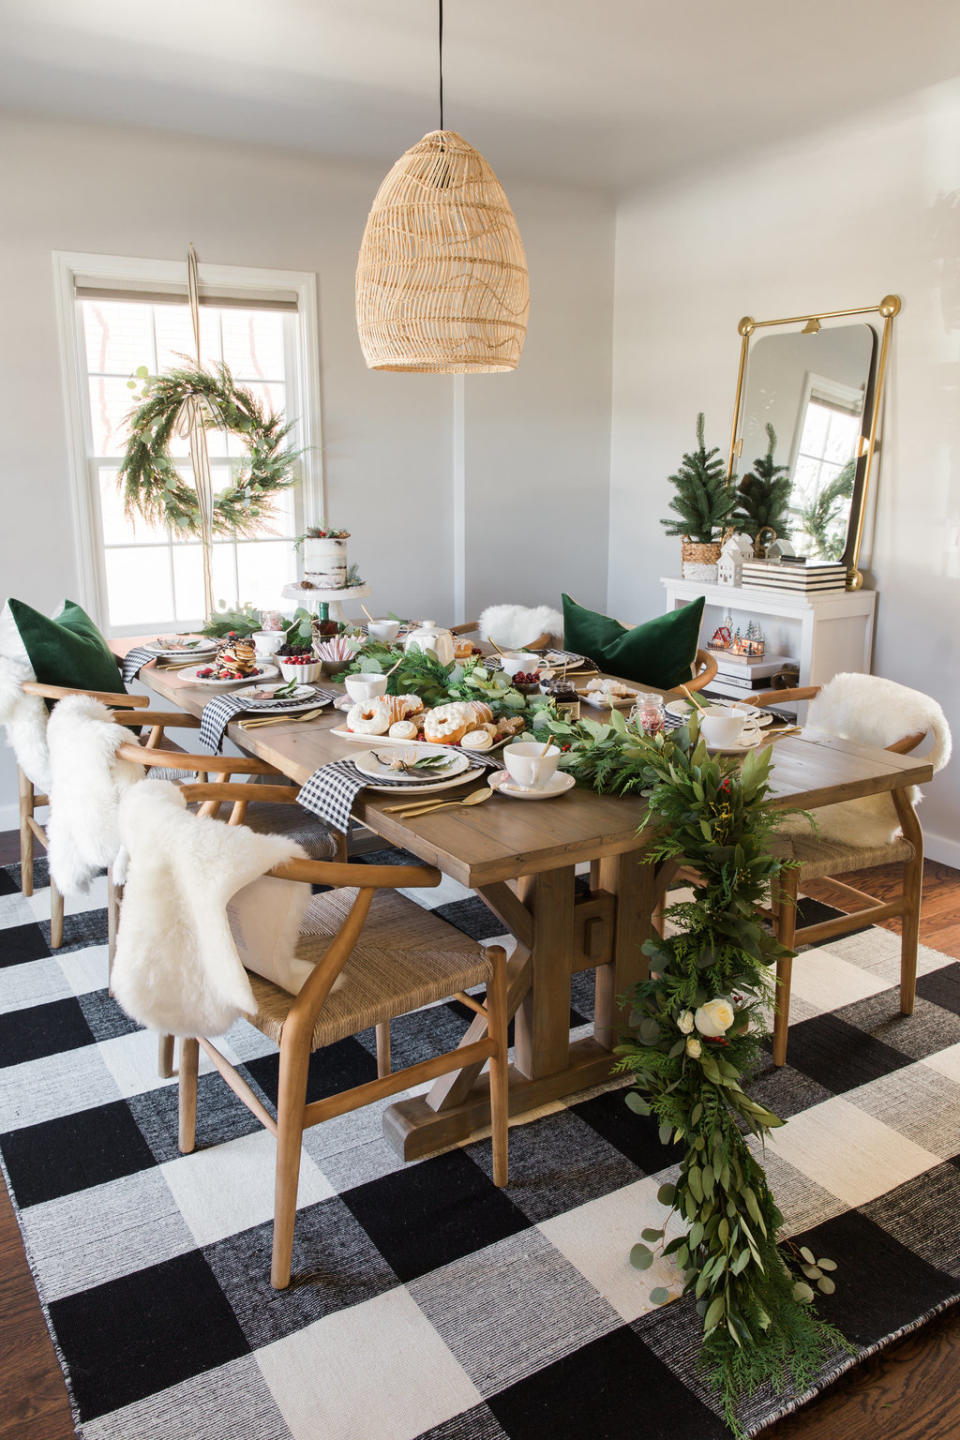 <p>¾Start a new tradition with these tips from lifestyle blogger Christine Andrew.</p>